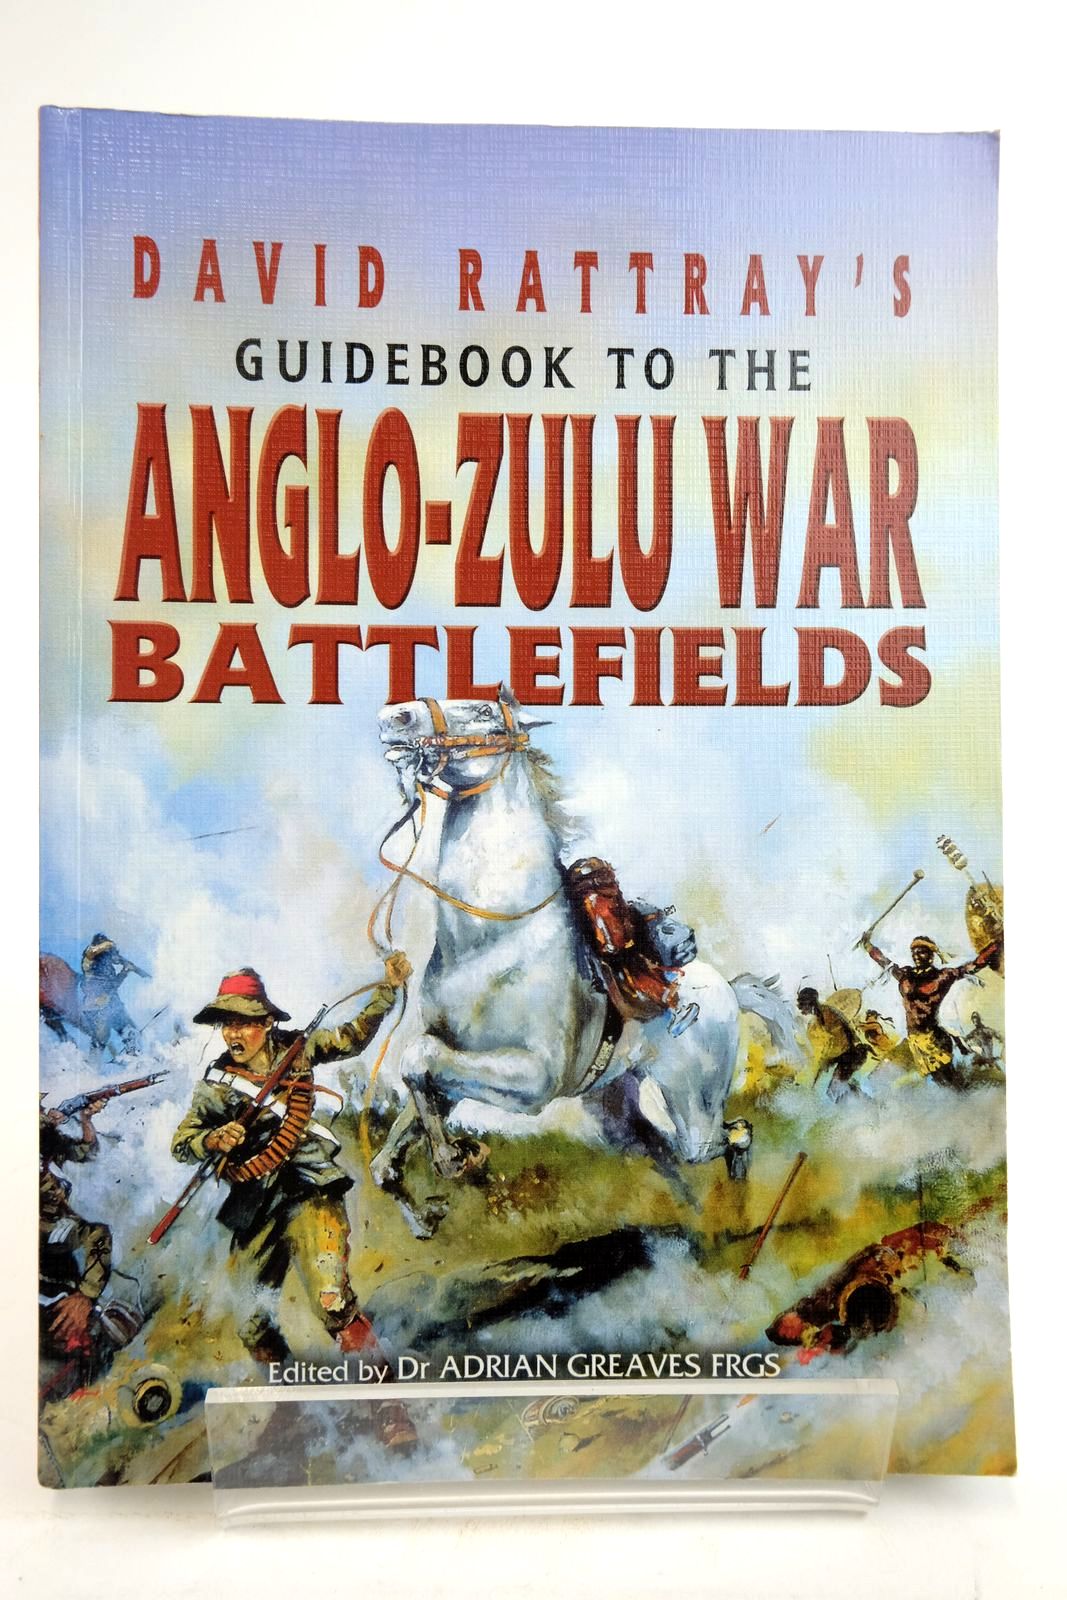 Photo of DAVID RATTRAY'S GUIDEBOOK TO THE ANGLO-ZULU WAR BATTLEFIELDS written by Rattray, David
Greaves, Adrian published by Leo Cooper (STOCK CODE: 2136594)  for sale by Stella & Rose's Books